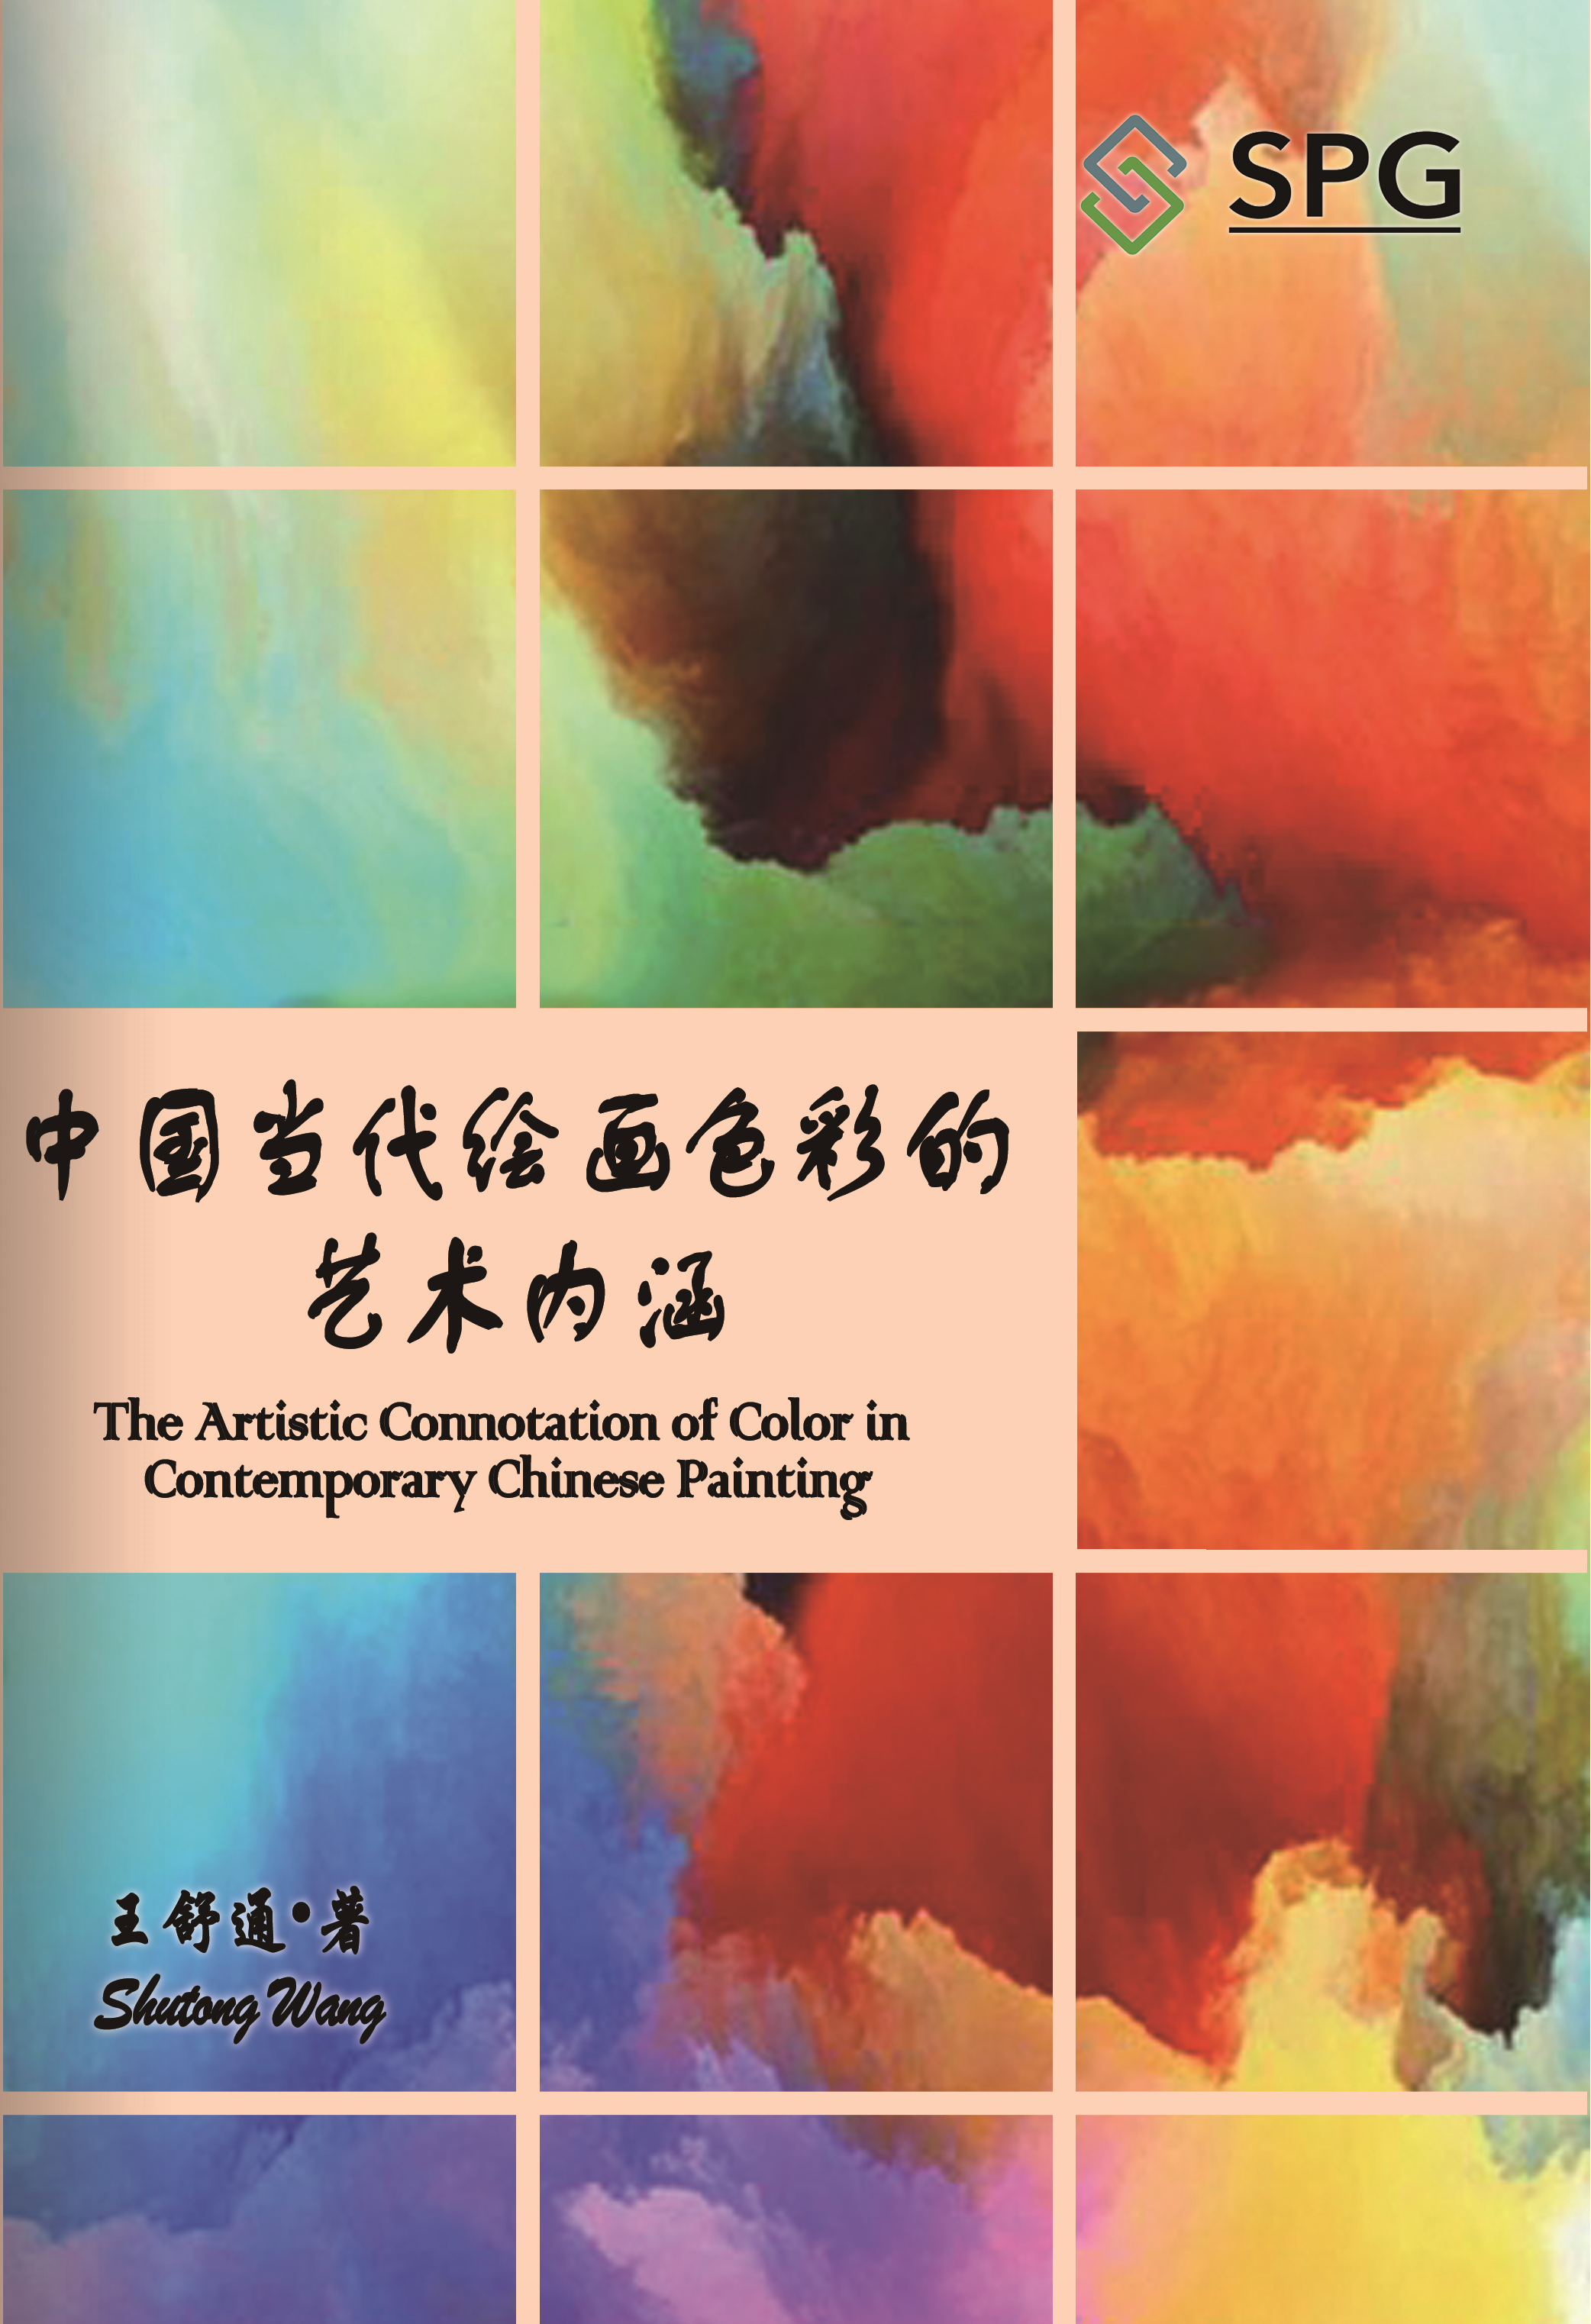 The Artistic Connotation of Color in Contemporary Chinese Painting | Scholar Publishing Group